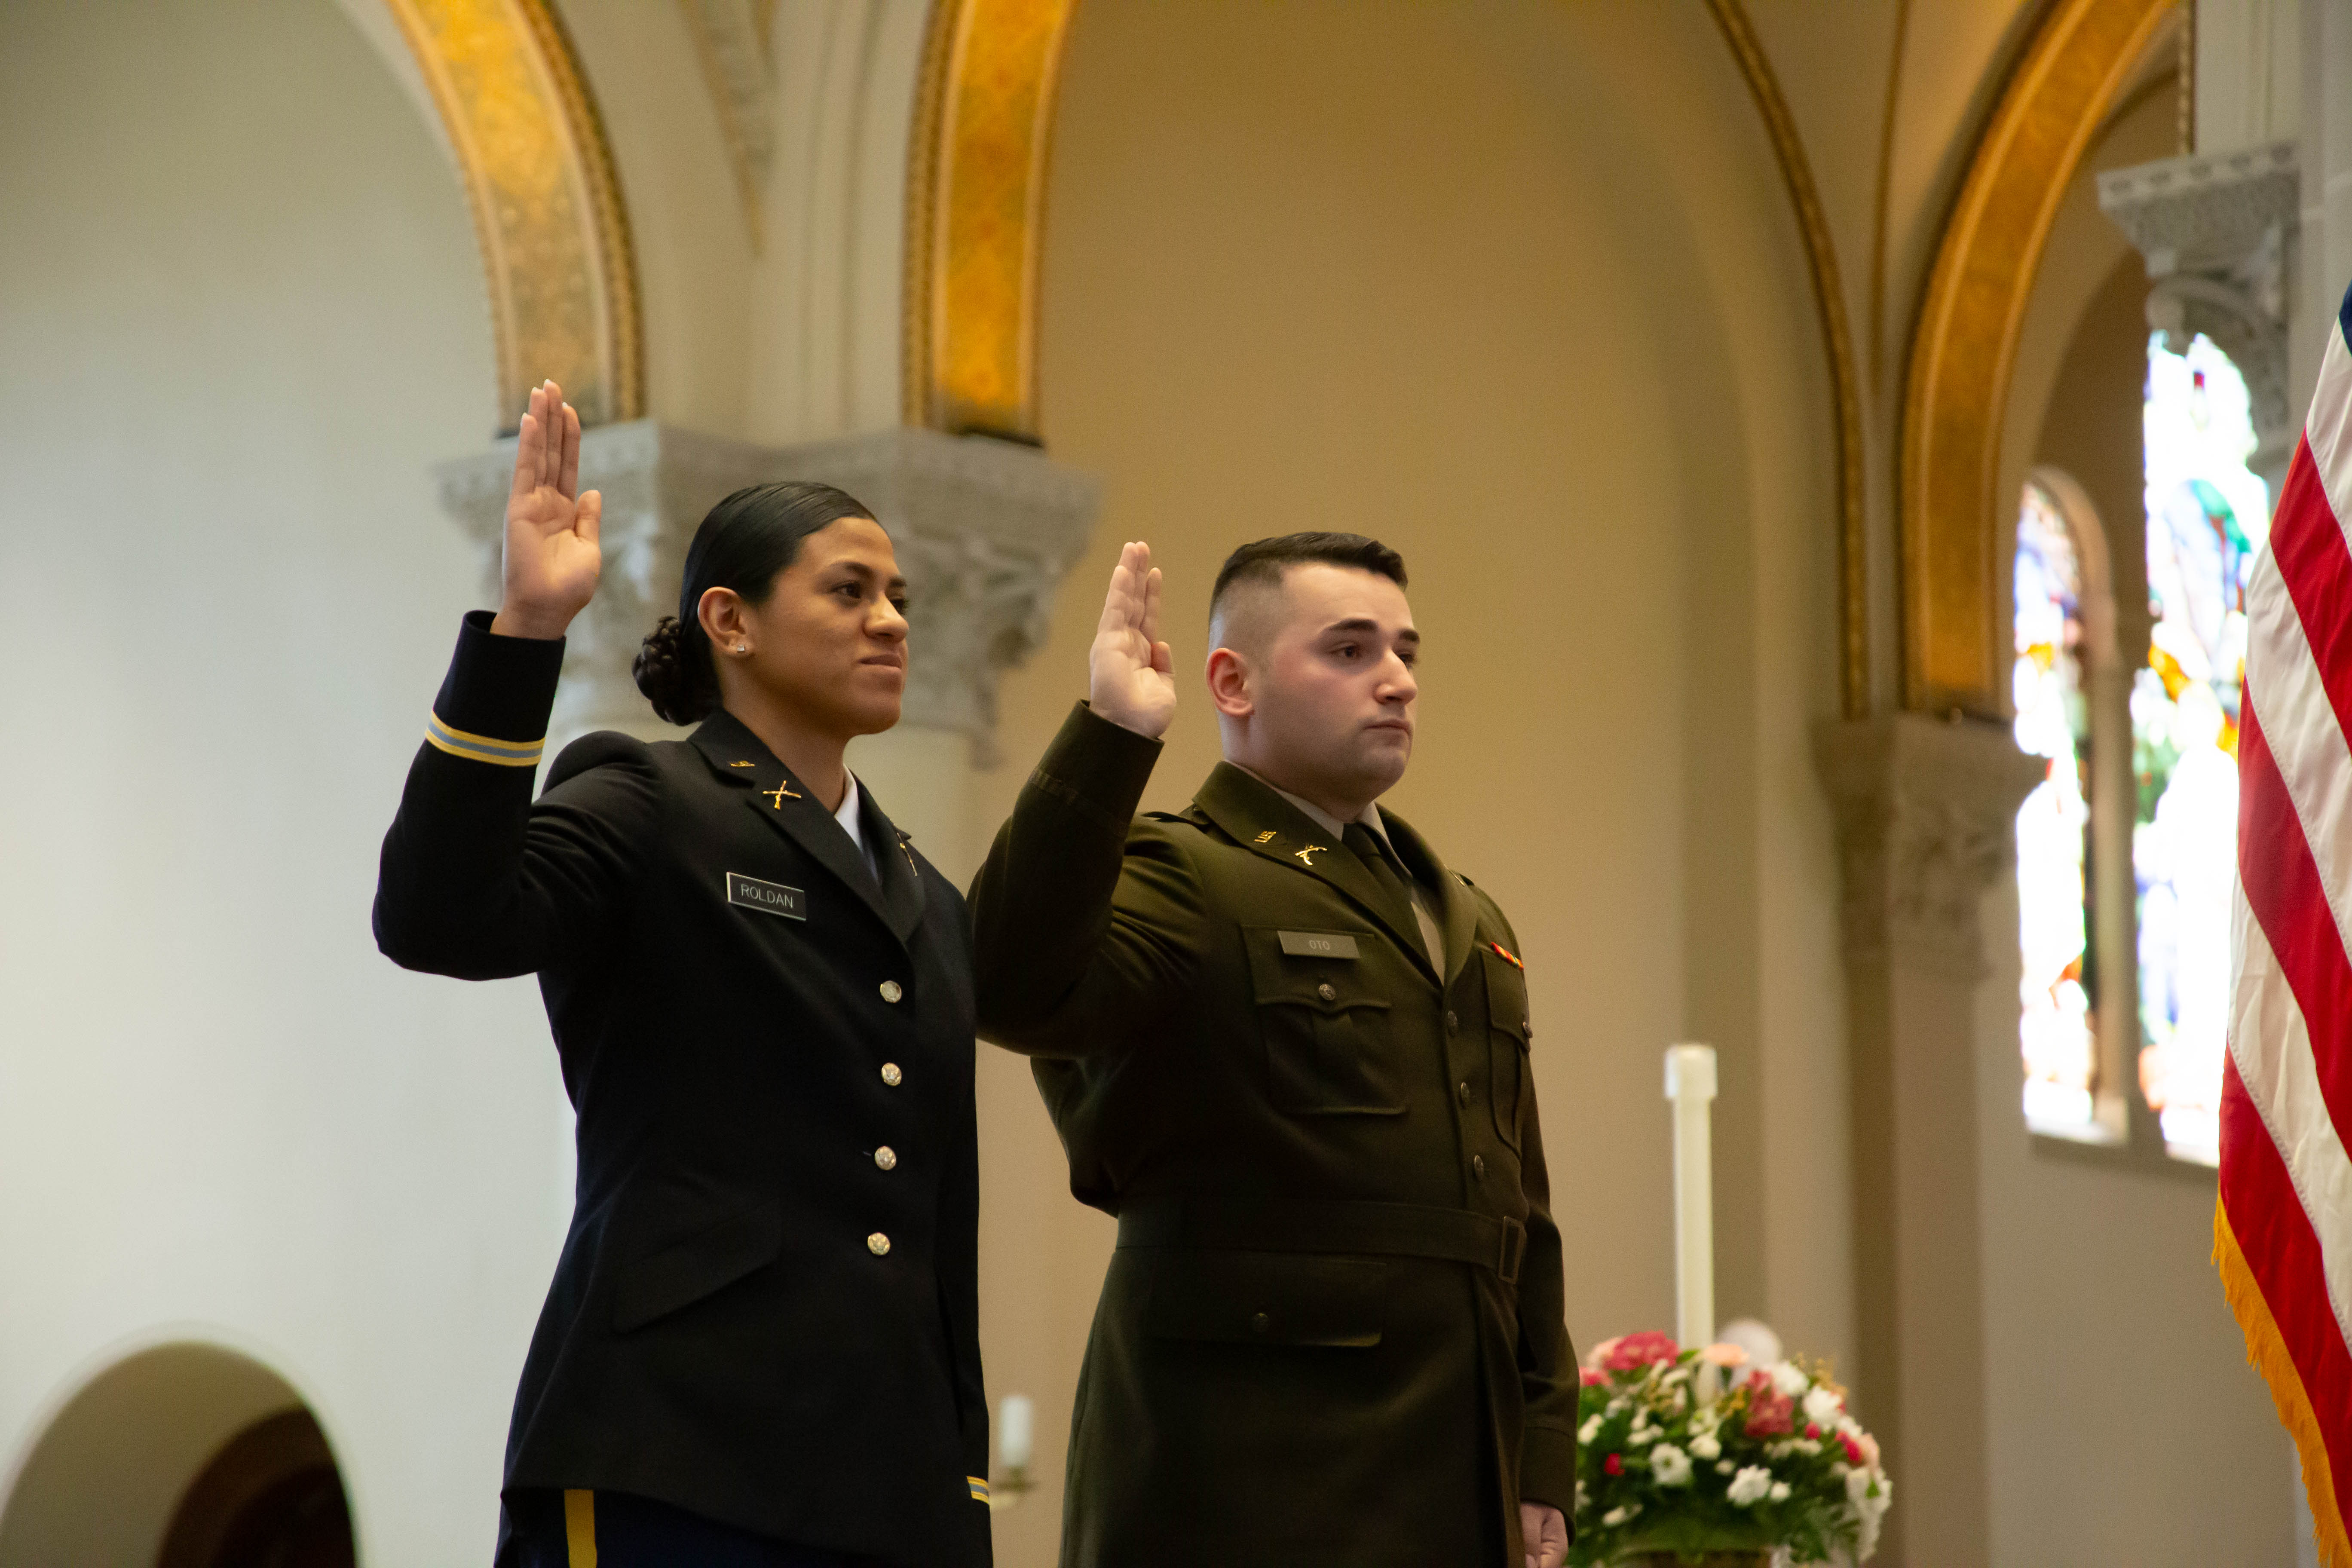 2nd Lt. Riley Roldan (left) and 2nd Lt. Dominic Oto take the Oath of Commissioned Officers